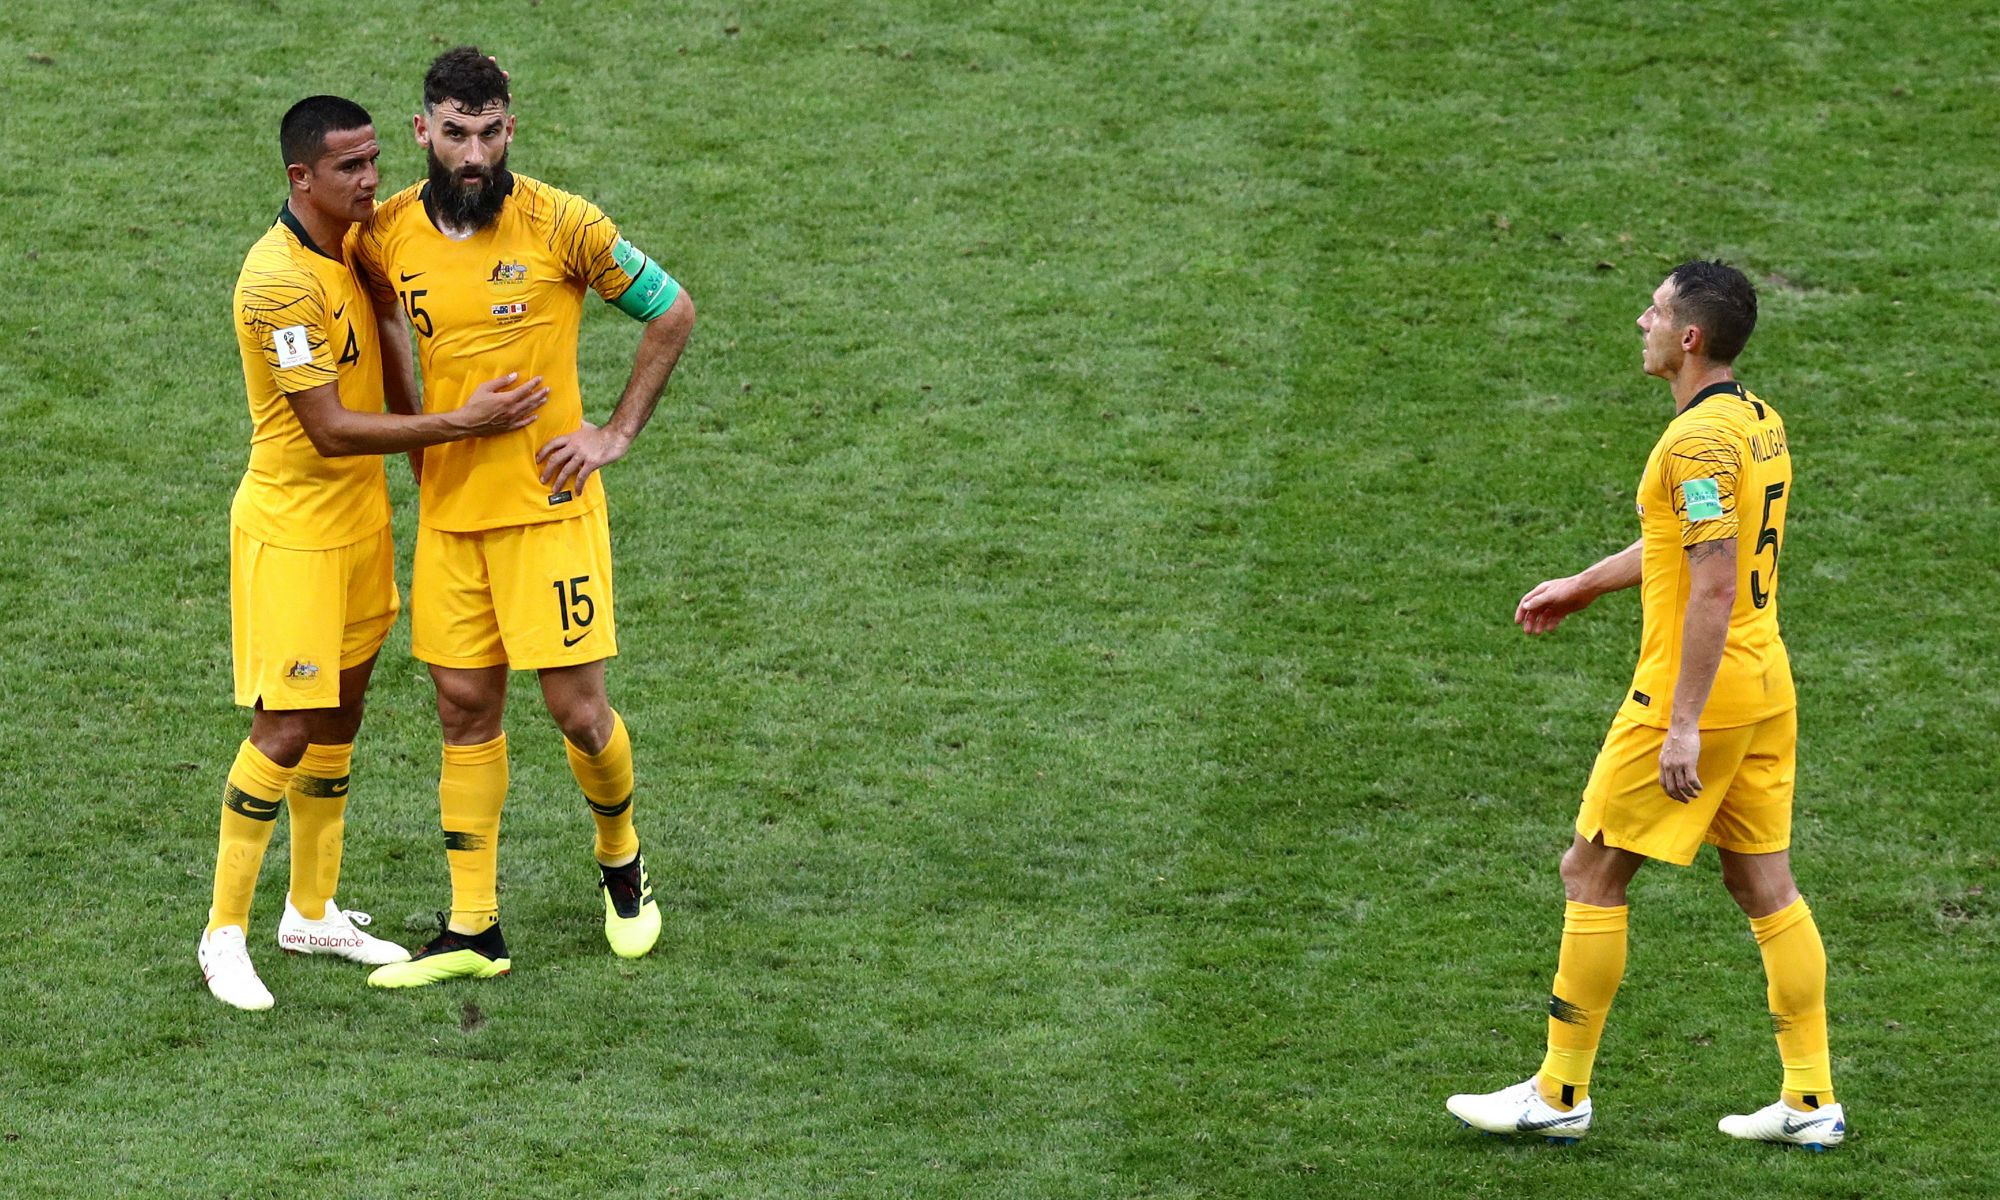 Tim Cahill, Mile Jedinak and Mark Milligan led the Caltex Socceroos at the FIFA World Cup 2018 and the trio have since retired.